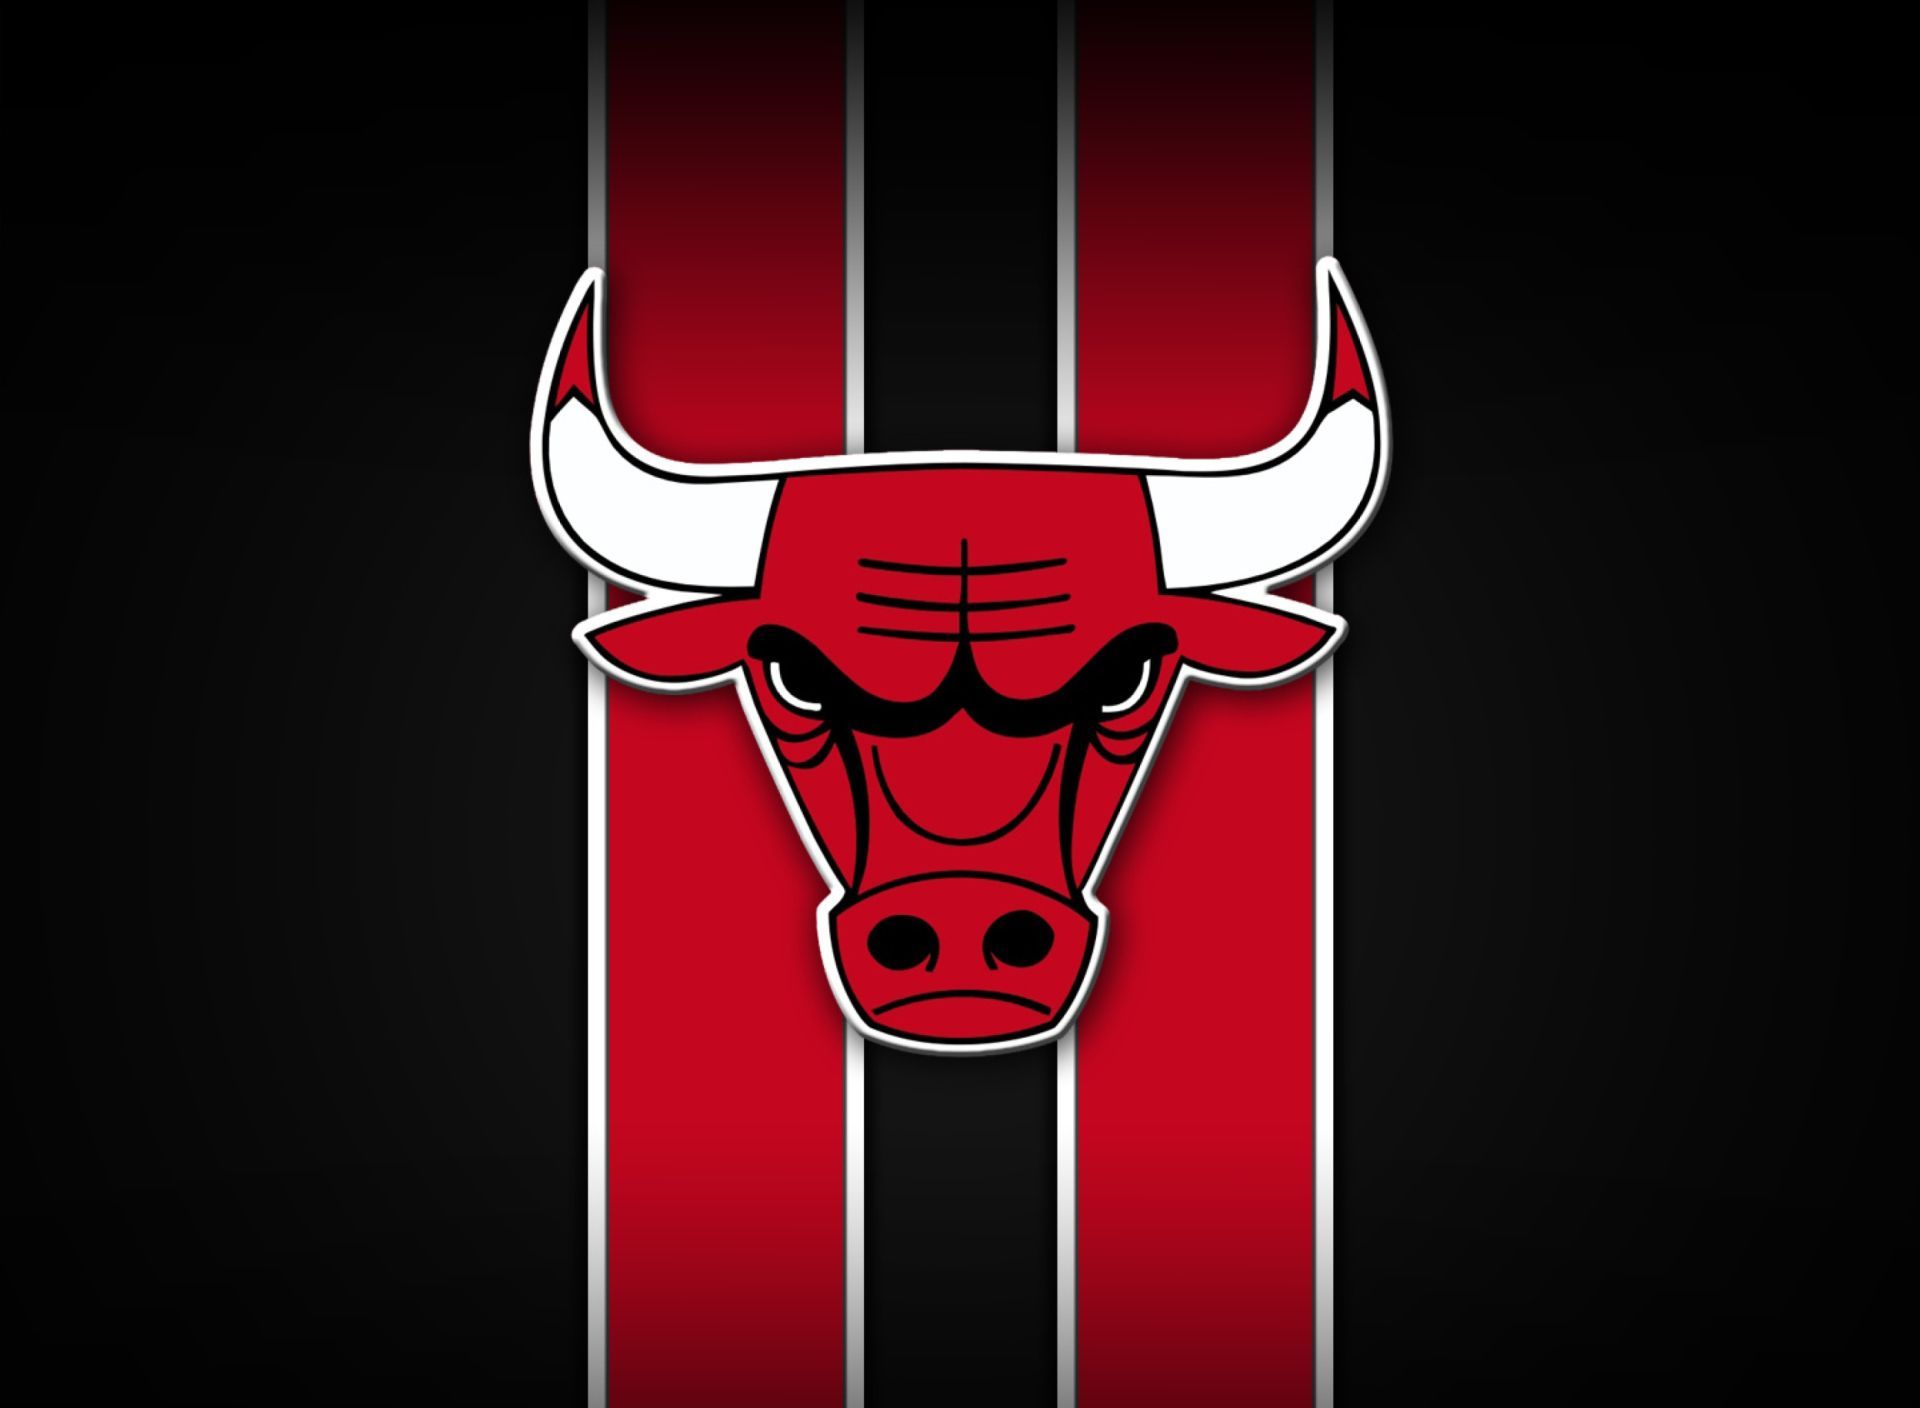 NBA Coaching Report: Chicago Bulls Complete Billy Donovan's Staff